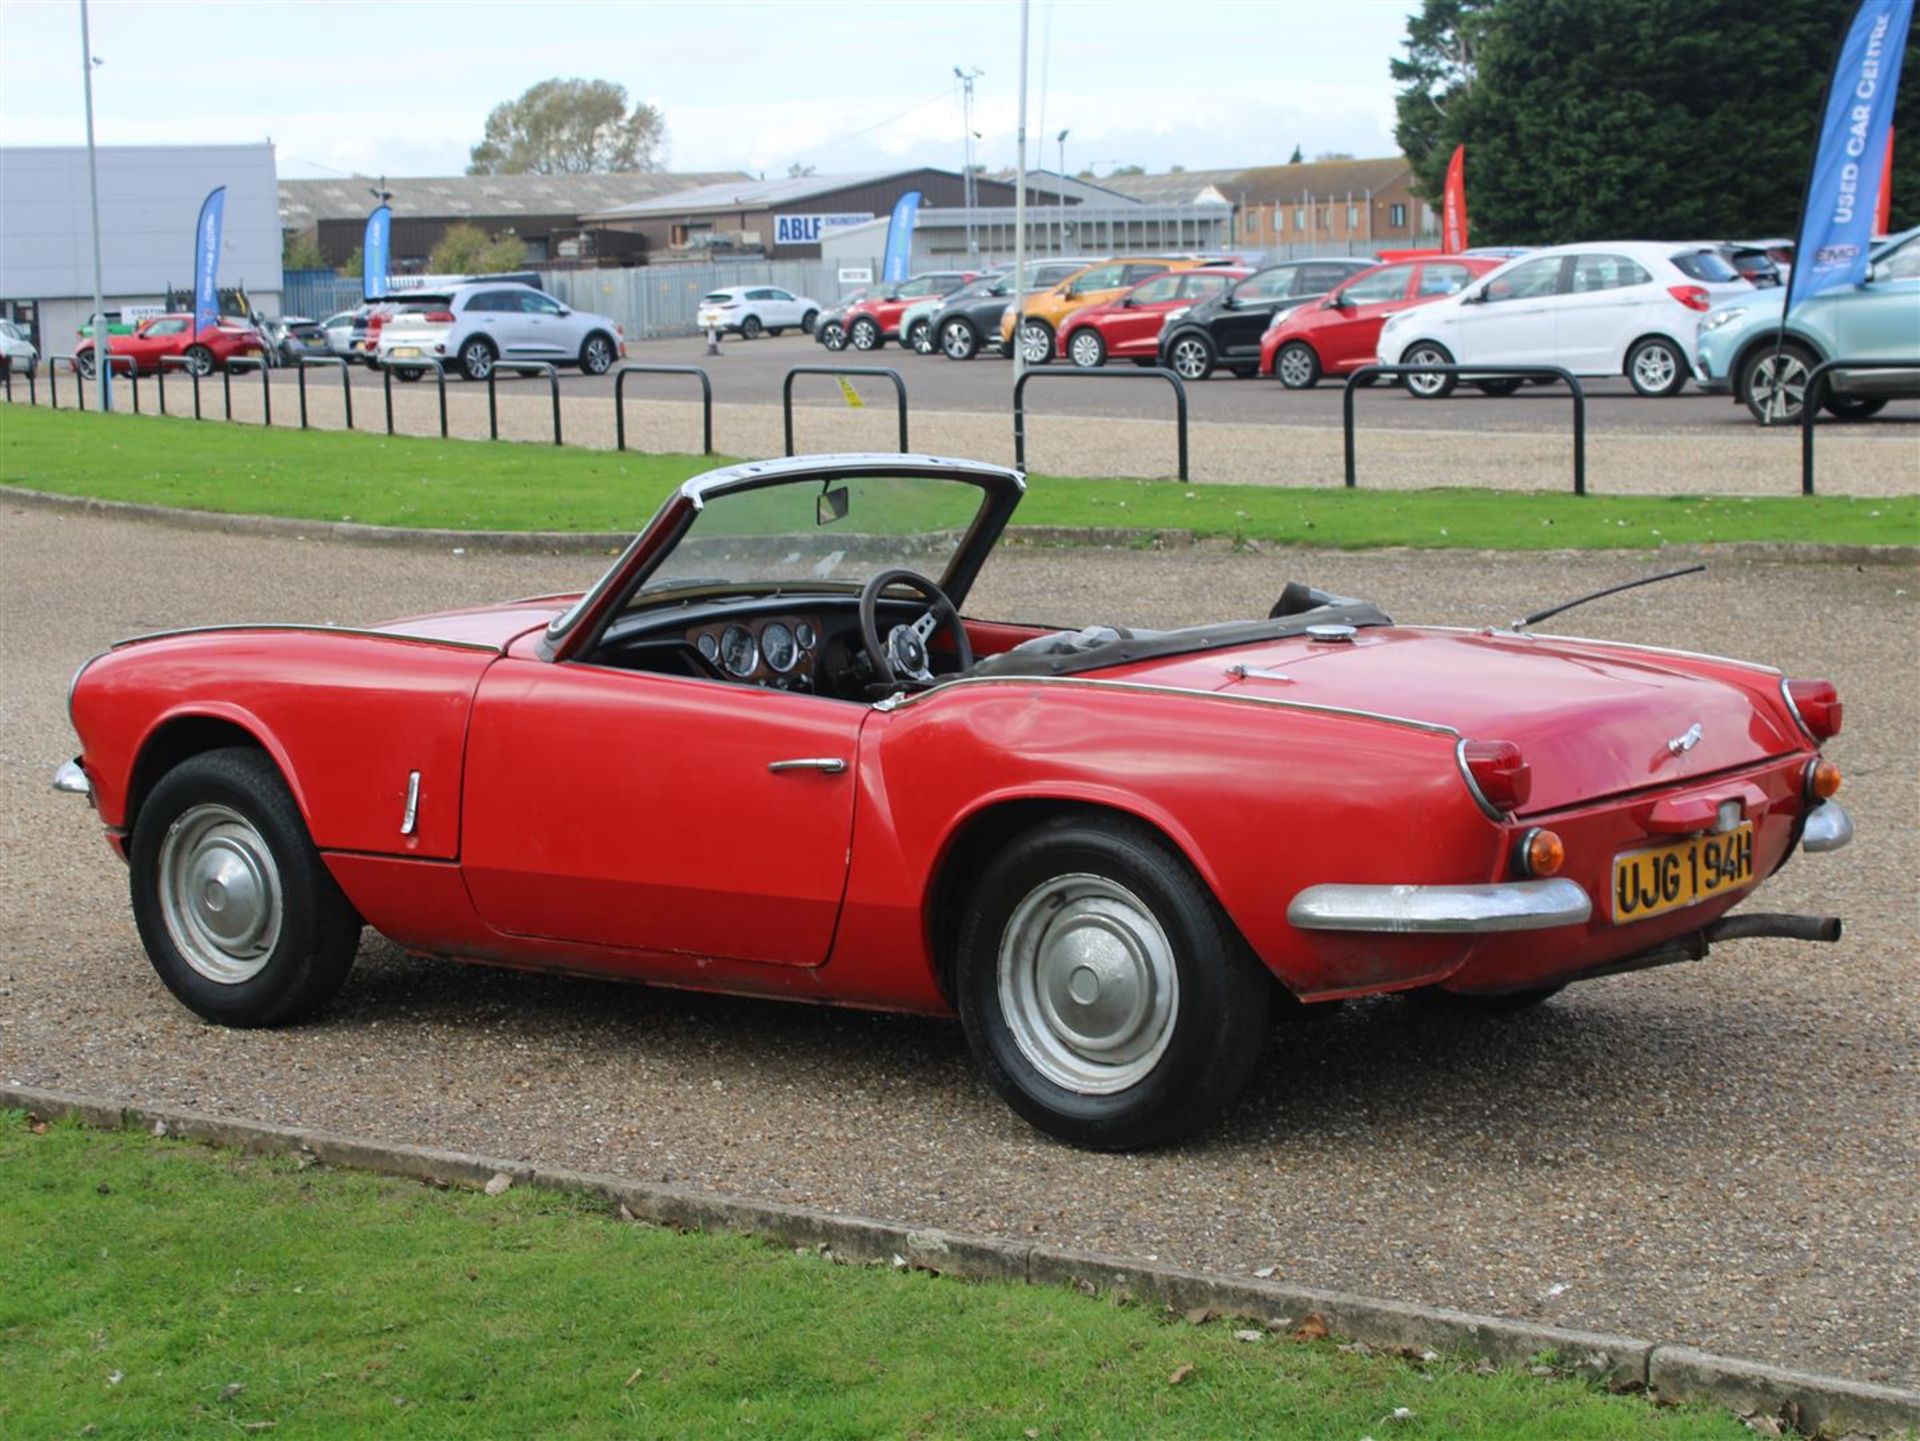 1970 Triumph Spitfire MKIII - Image 4 of 15